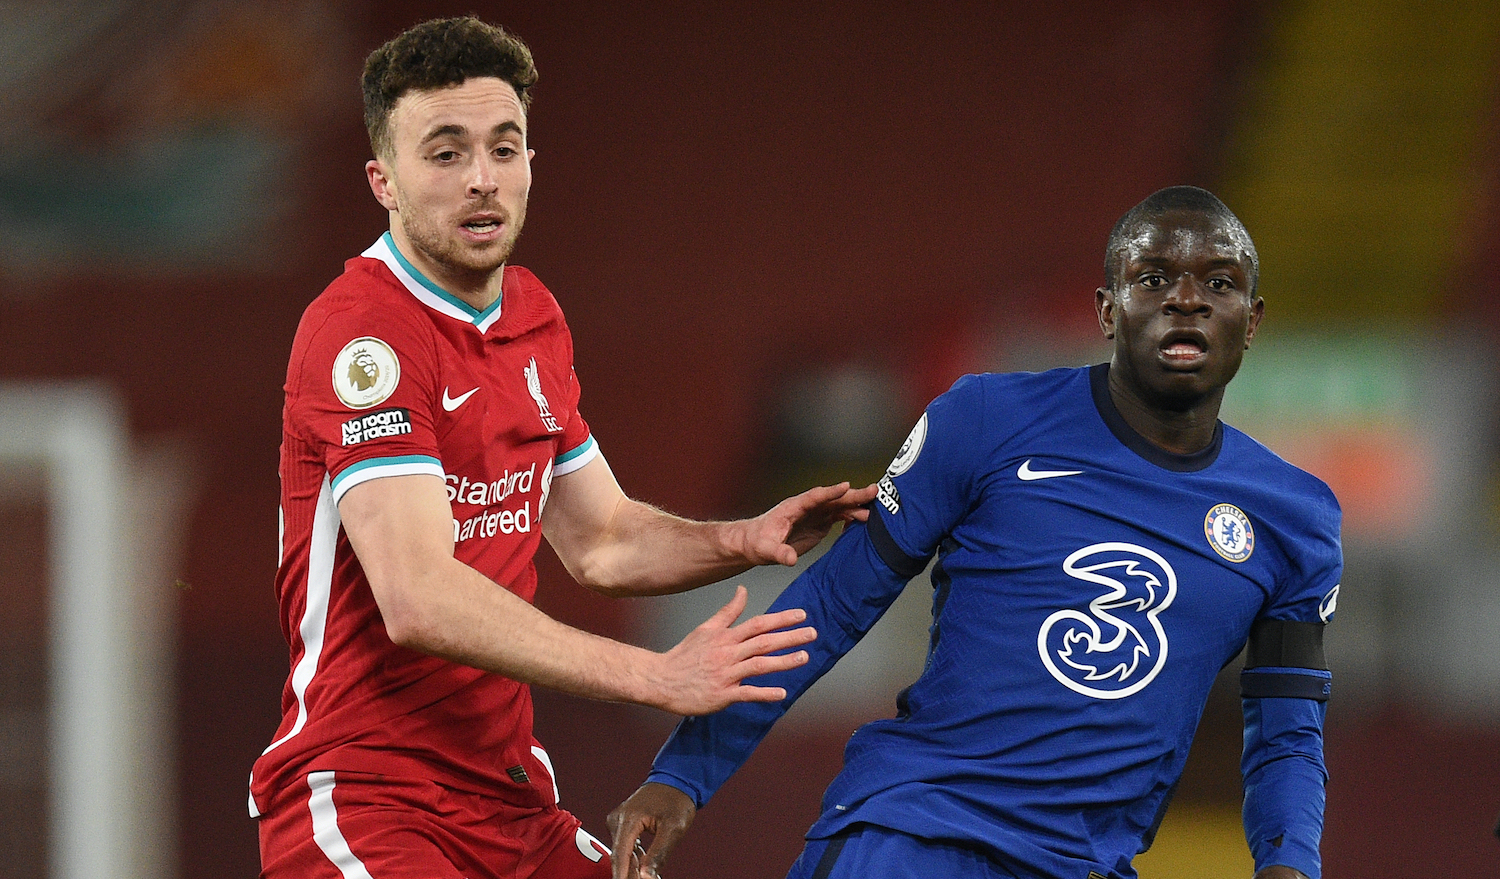 Liverpool's Diogo Jota (left) and Chelsea's N'Golo Kante battle for the ball during the Premier League match at Anfield, Liverpool. Picture date: Thursday March 4, 2021. (Photo by Oli Scarff/PA Images via Getty Images)